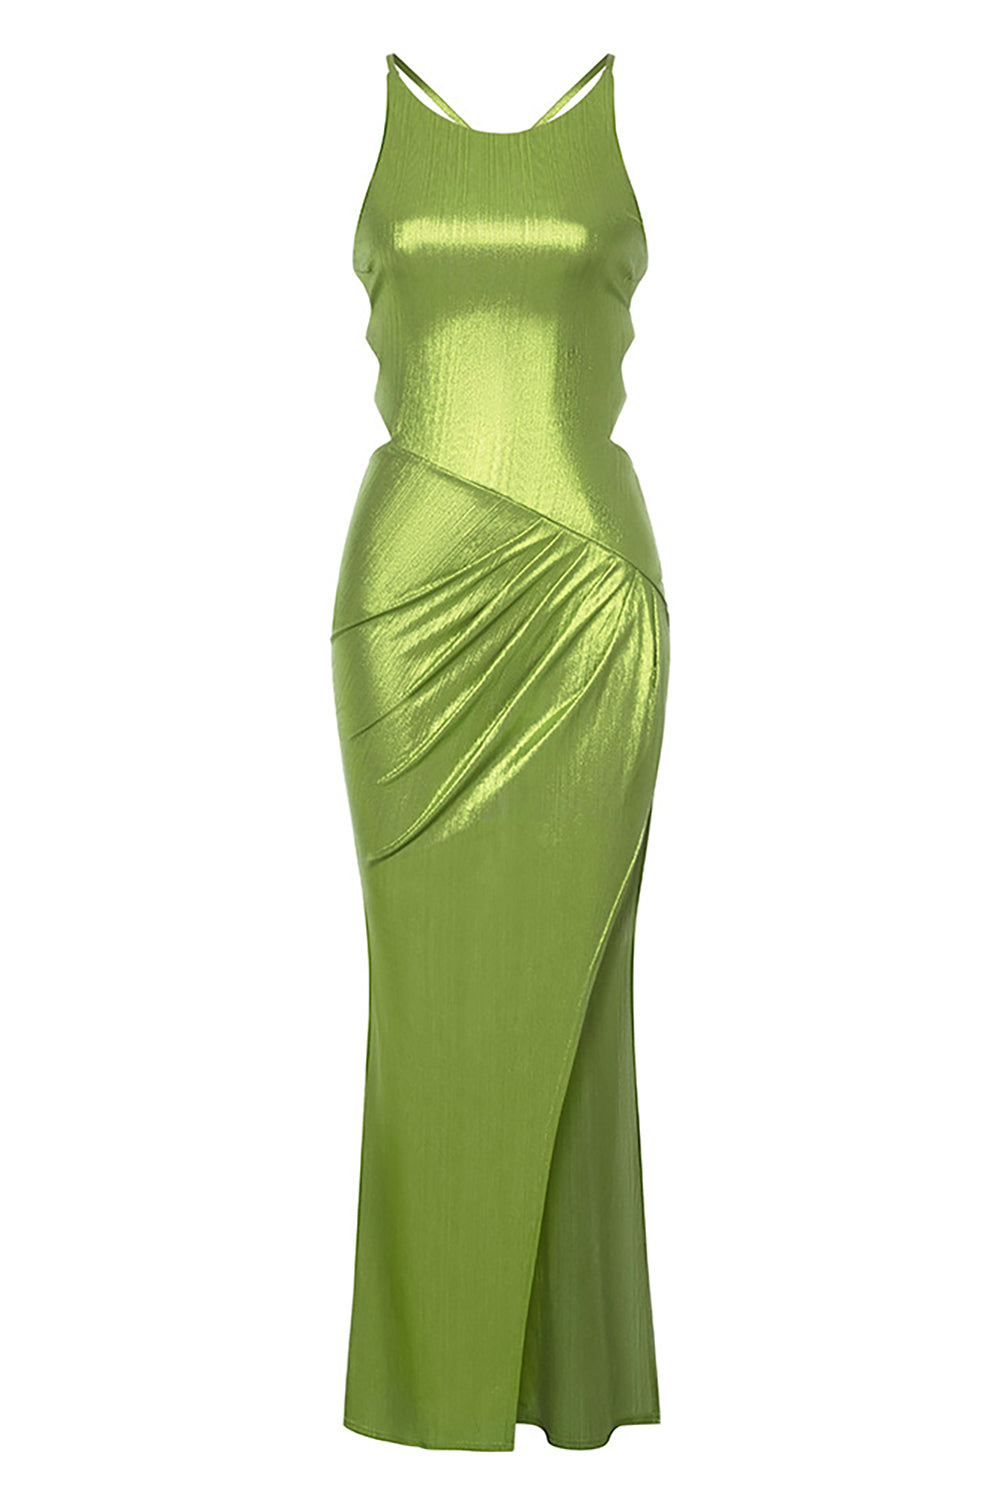 Green Ruffles Sparkly Cocktail Dress with Slit